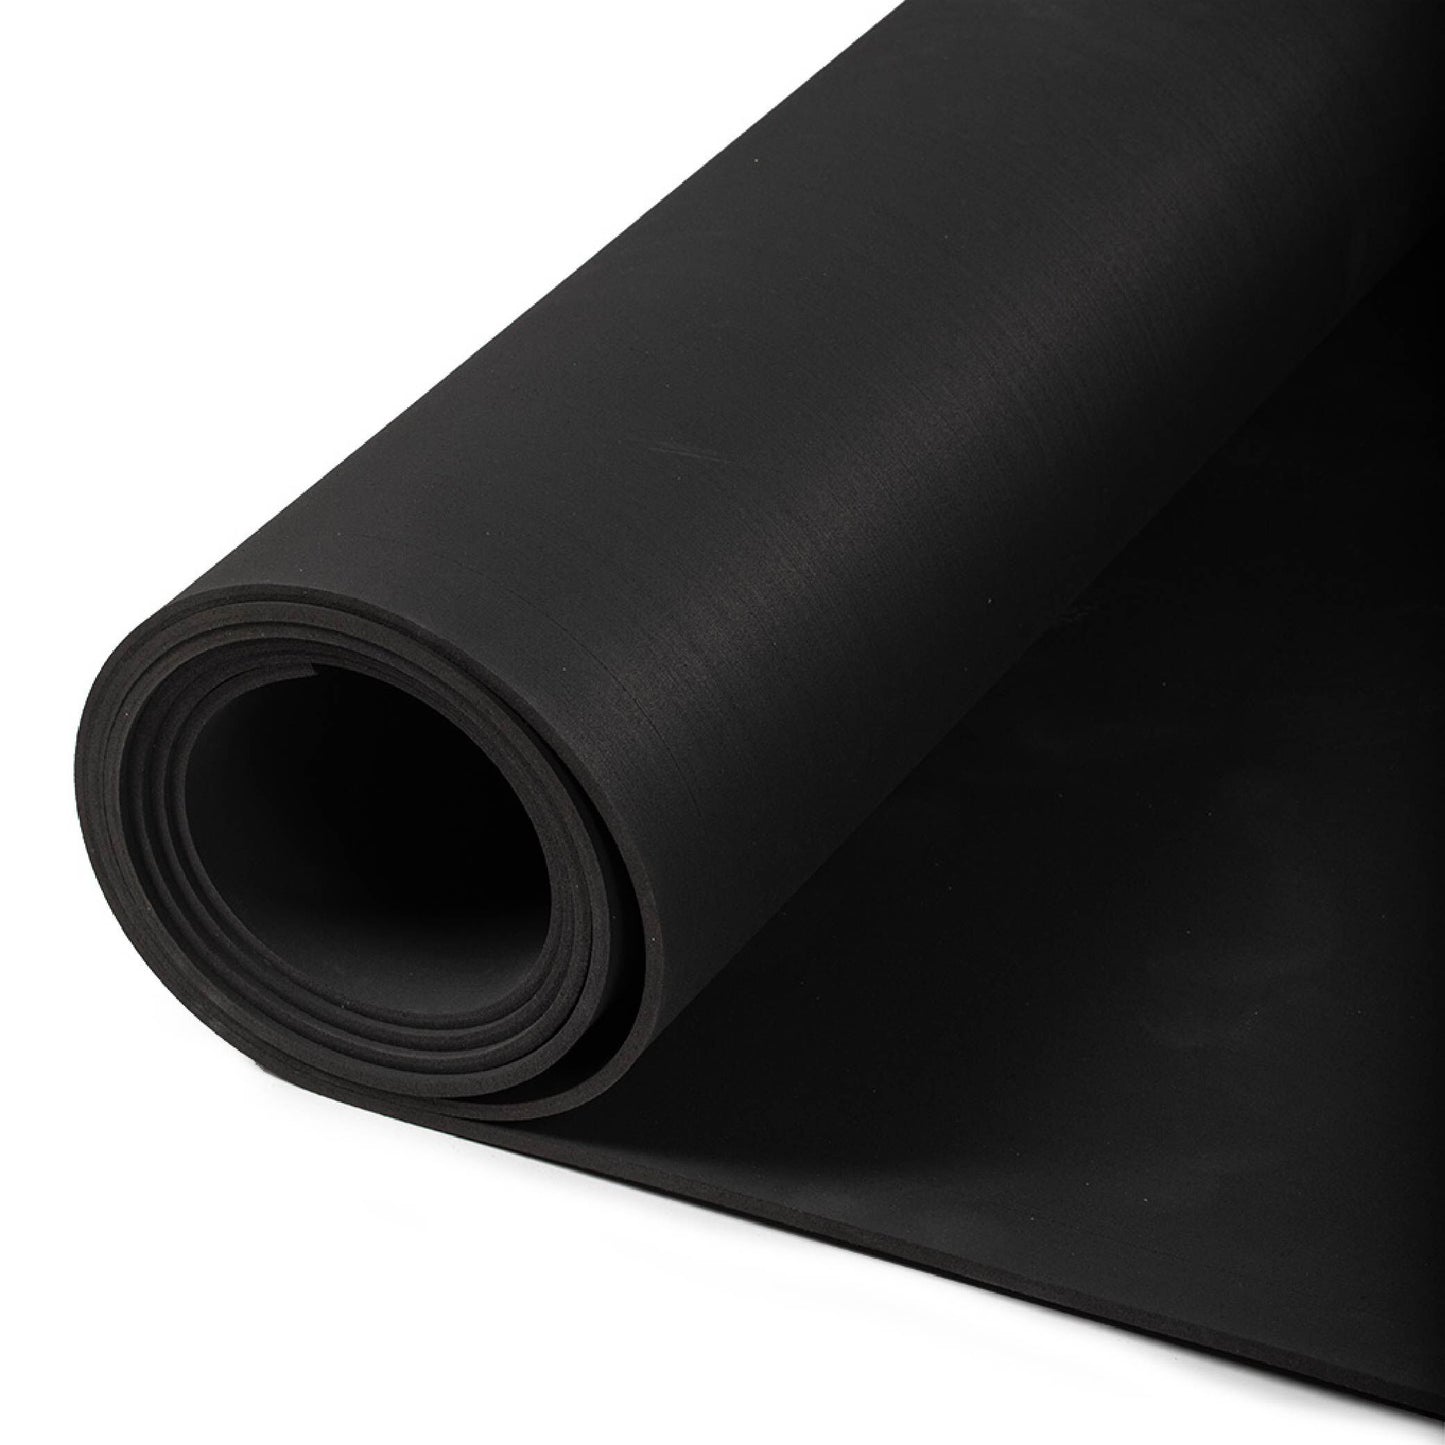 Black Rubber Gym Flooring Roll - view 1